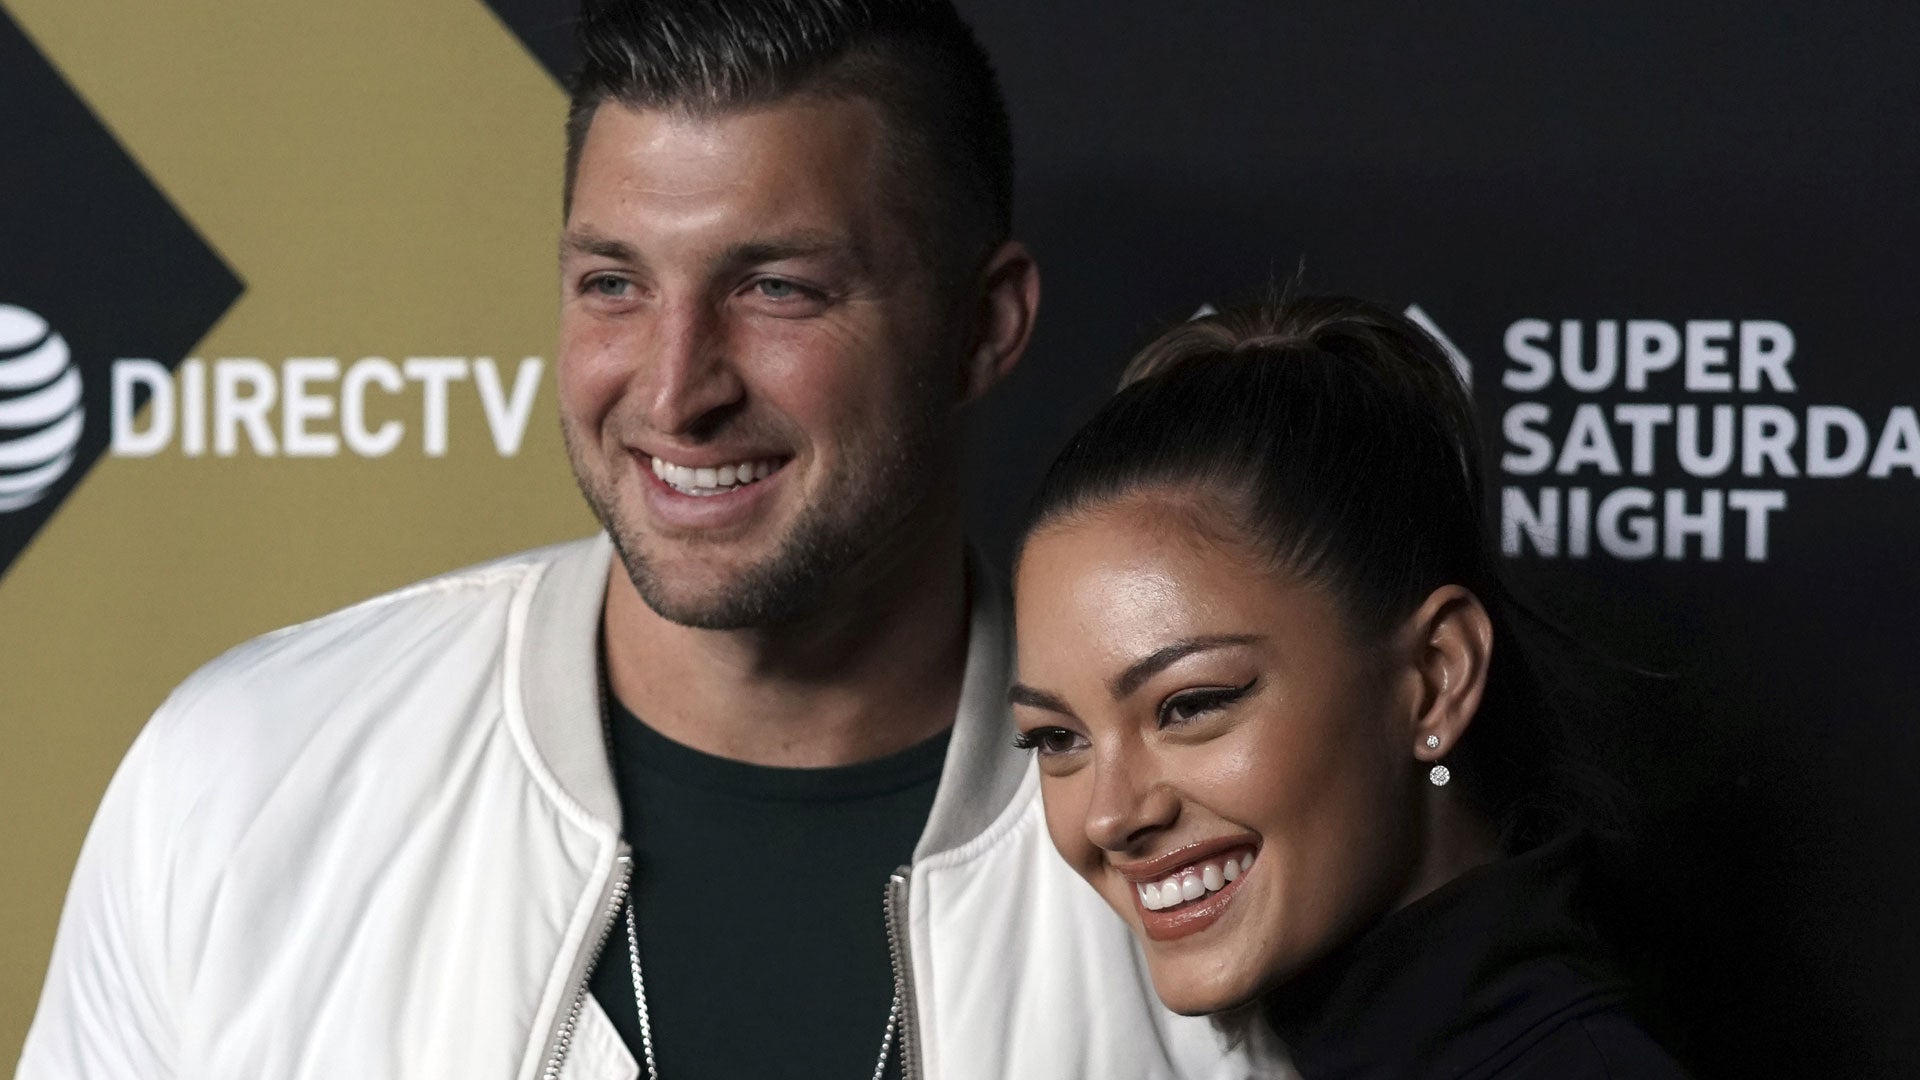 Former NFL QB Tim Tebow Marries Demi-Leigh Nel-Peters: 'My Dreams